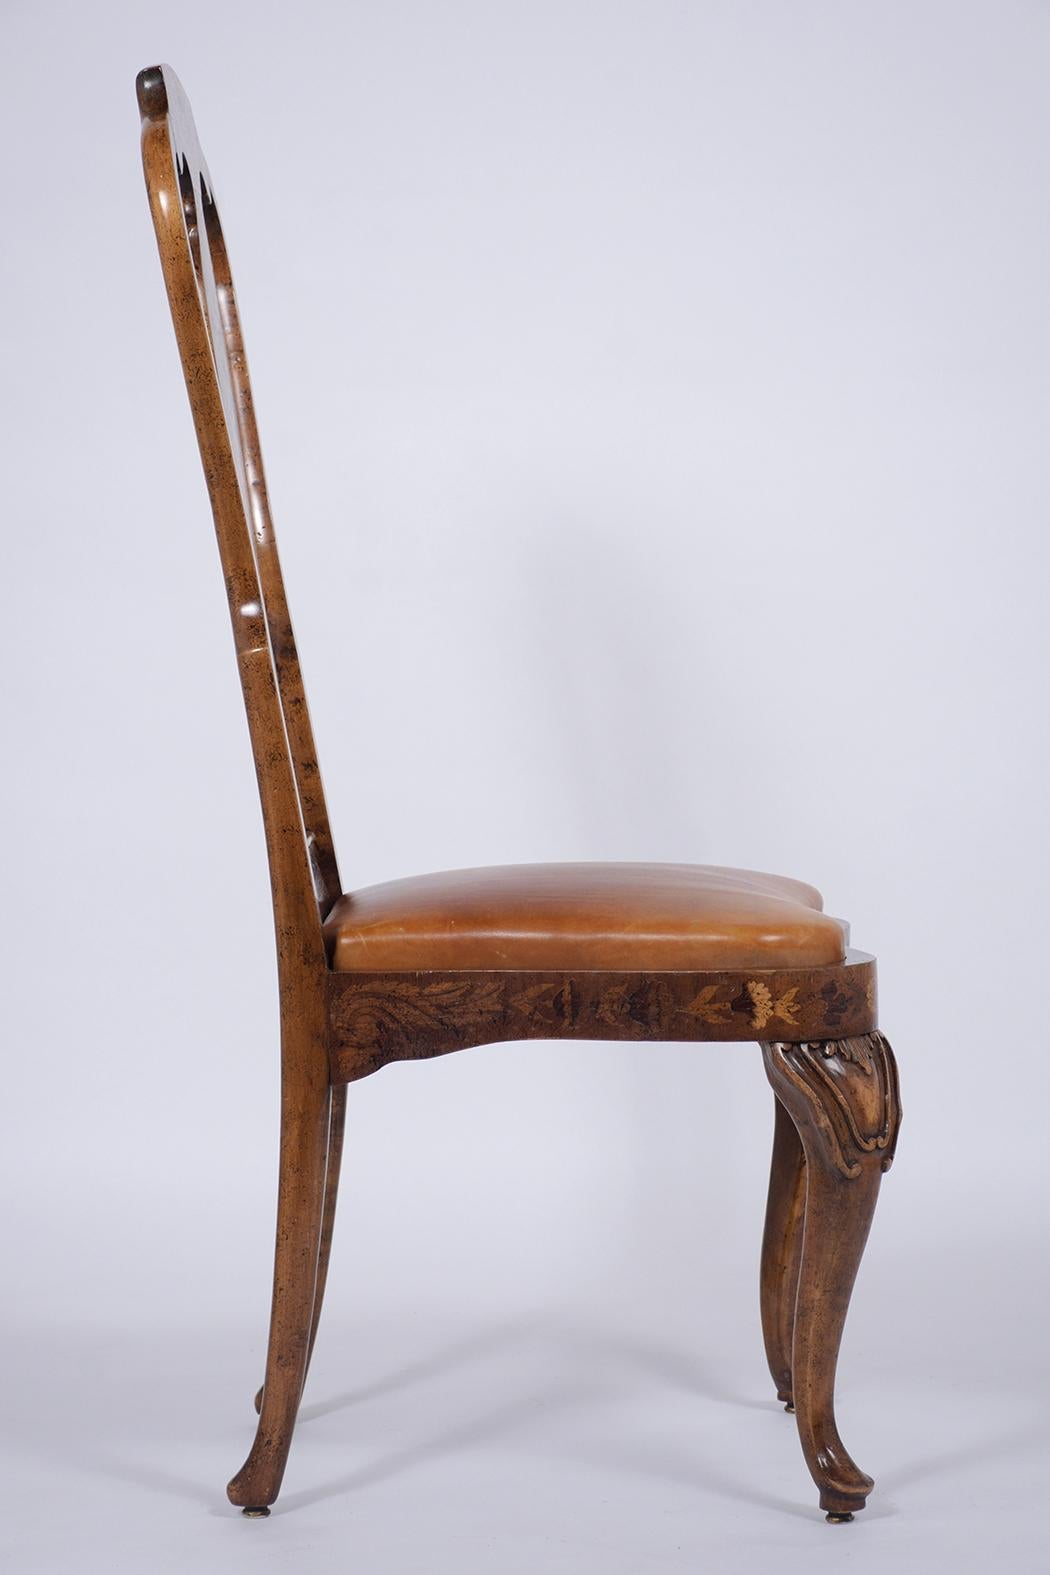 19th Century Antique Marquetry Chair